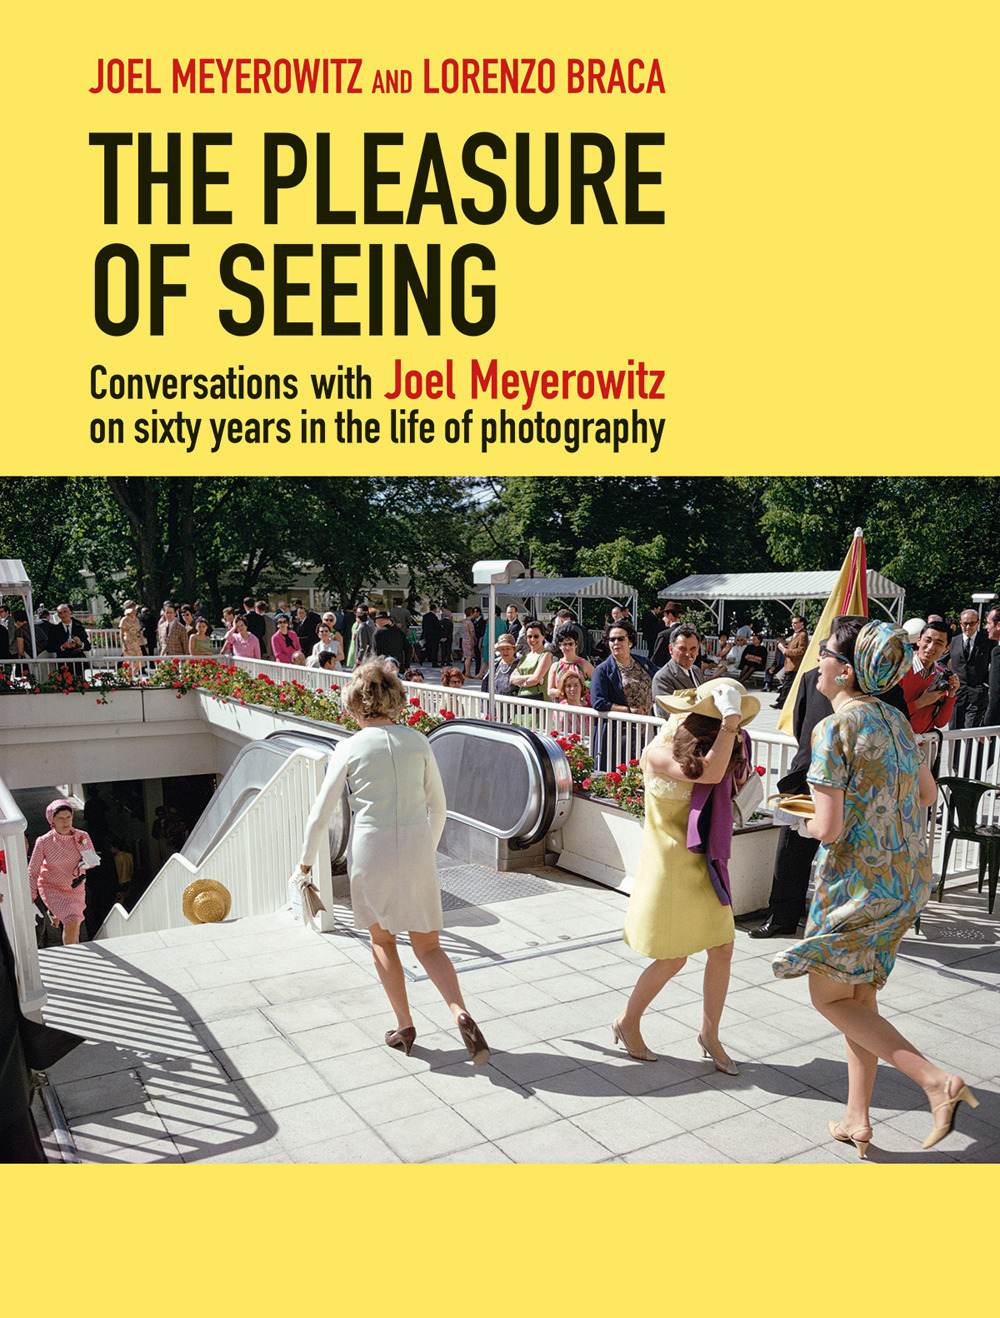 The pleasure of seeing. Conversations with Joel Meyerowitz on sixty years in the life of photography